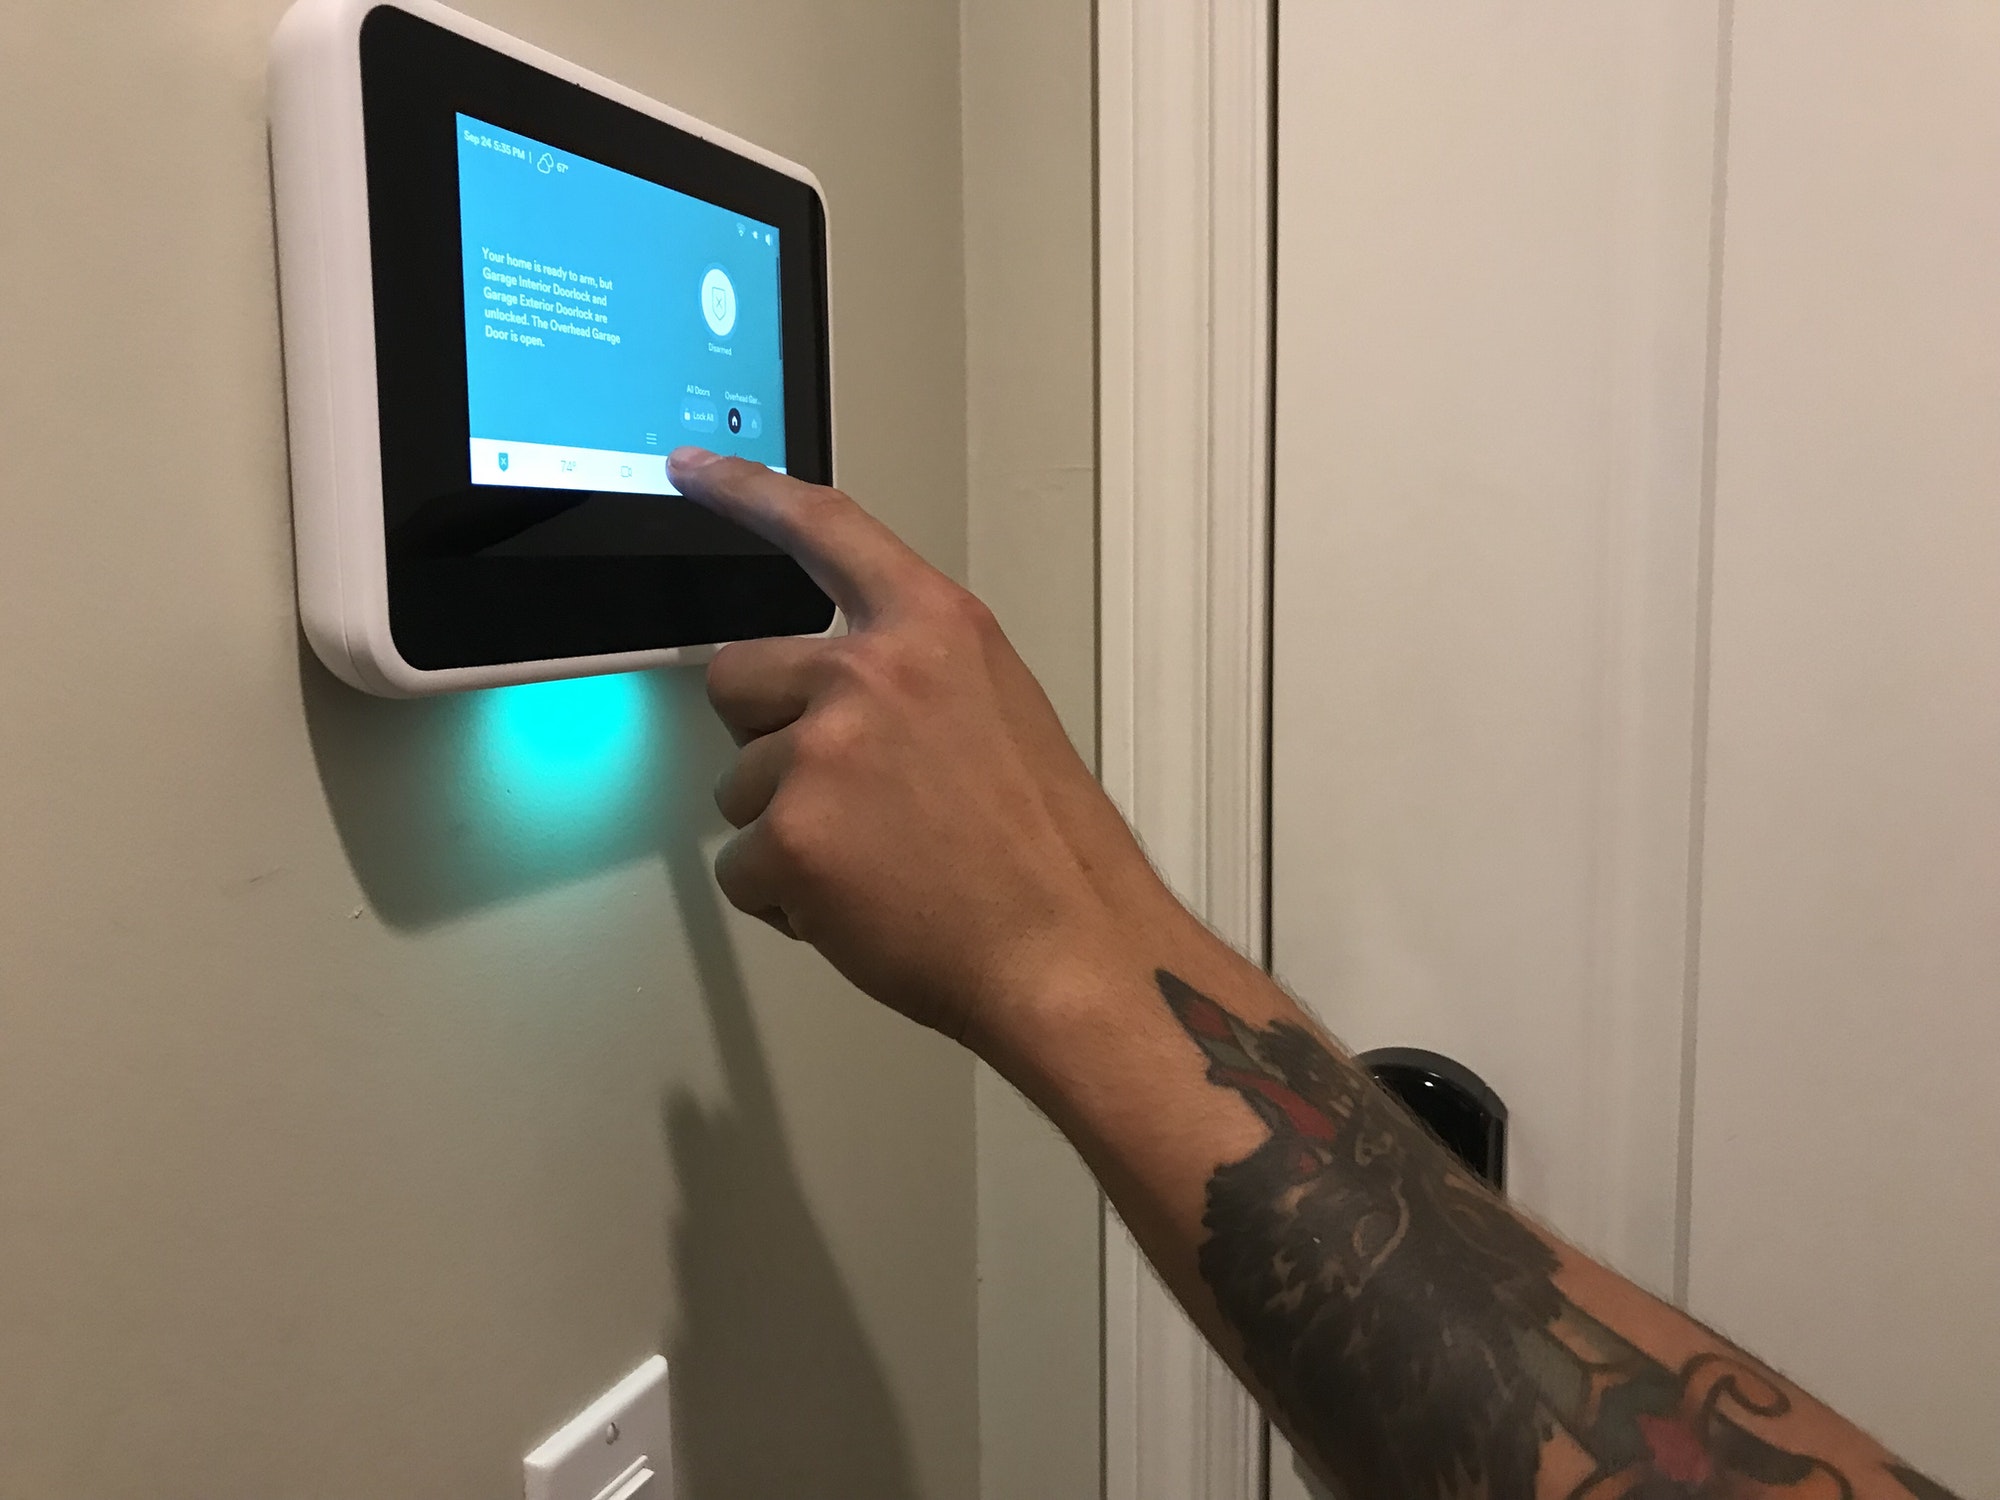 A Technician gives instructions on Programming the home security panel in a smart home.